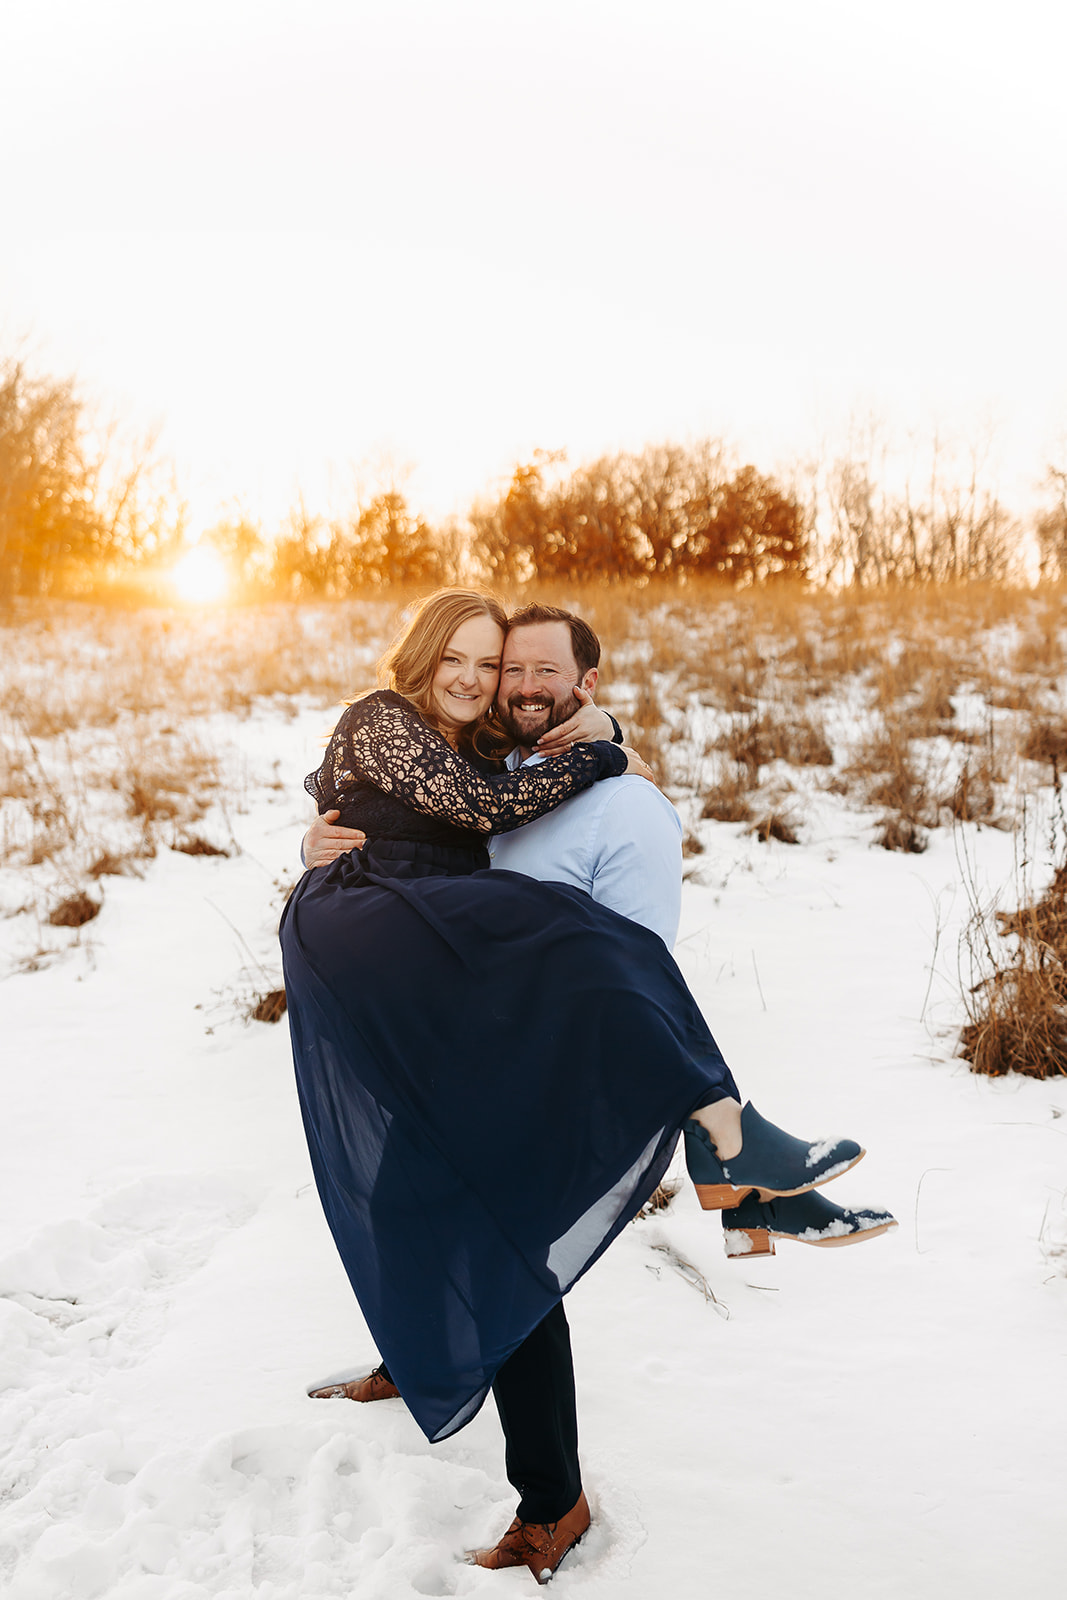 Man holding woman up in the snow while they are both smiling and the sun is behind them.